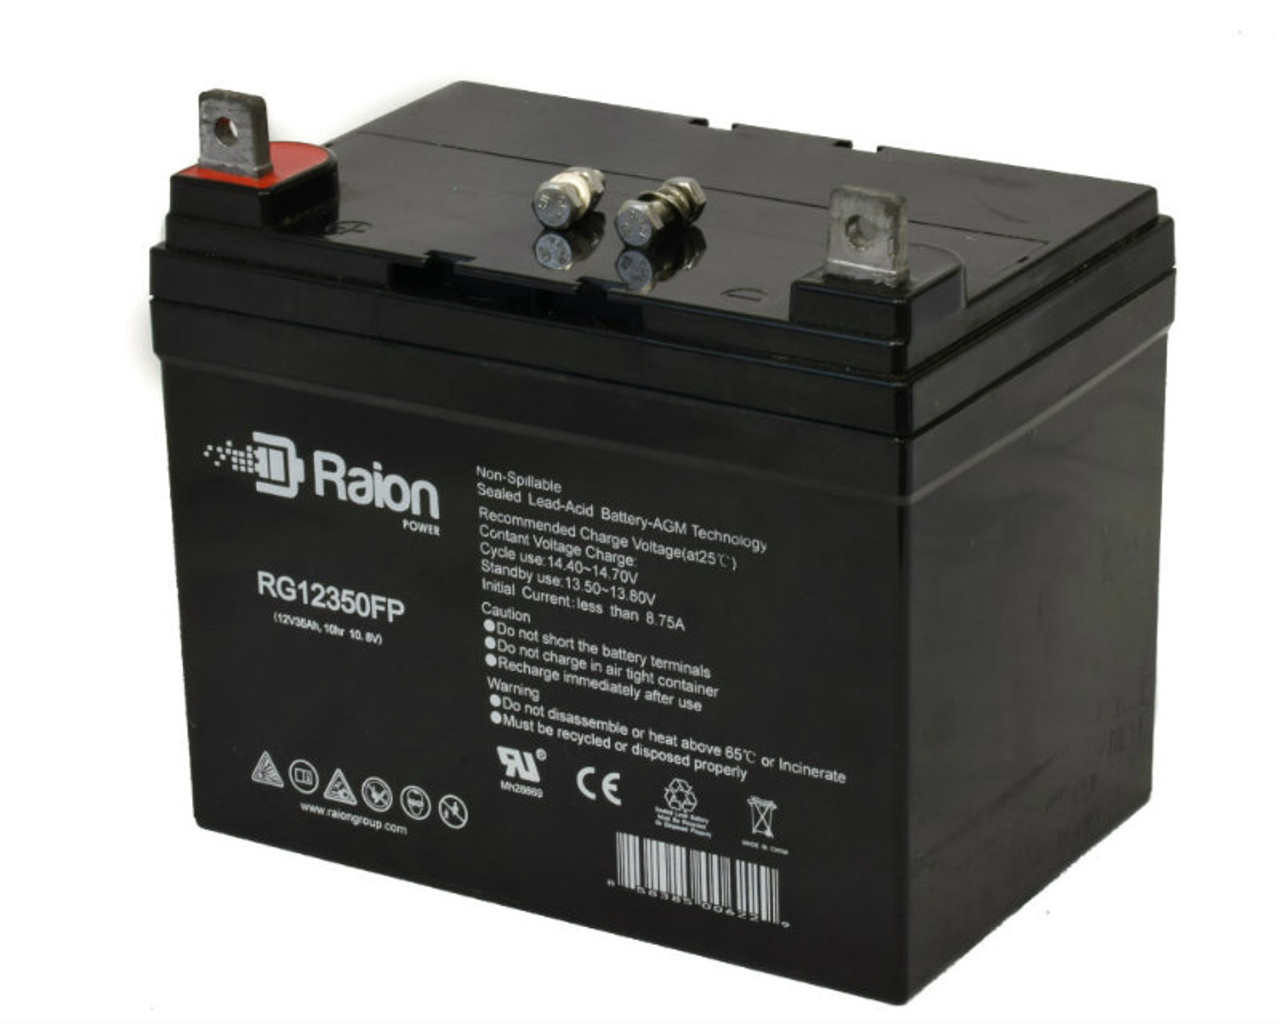 Raion Power Replacement 12V 35Ah RG12350FP Battery for Yard-Man X694G